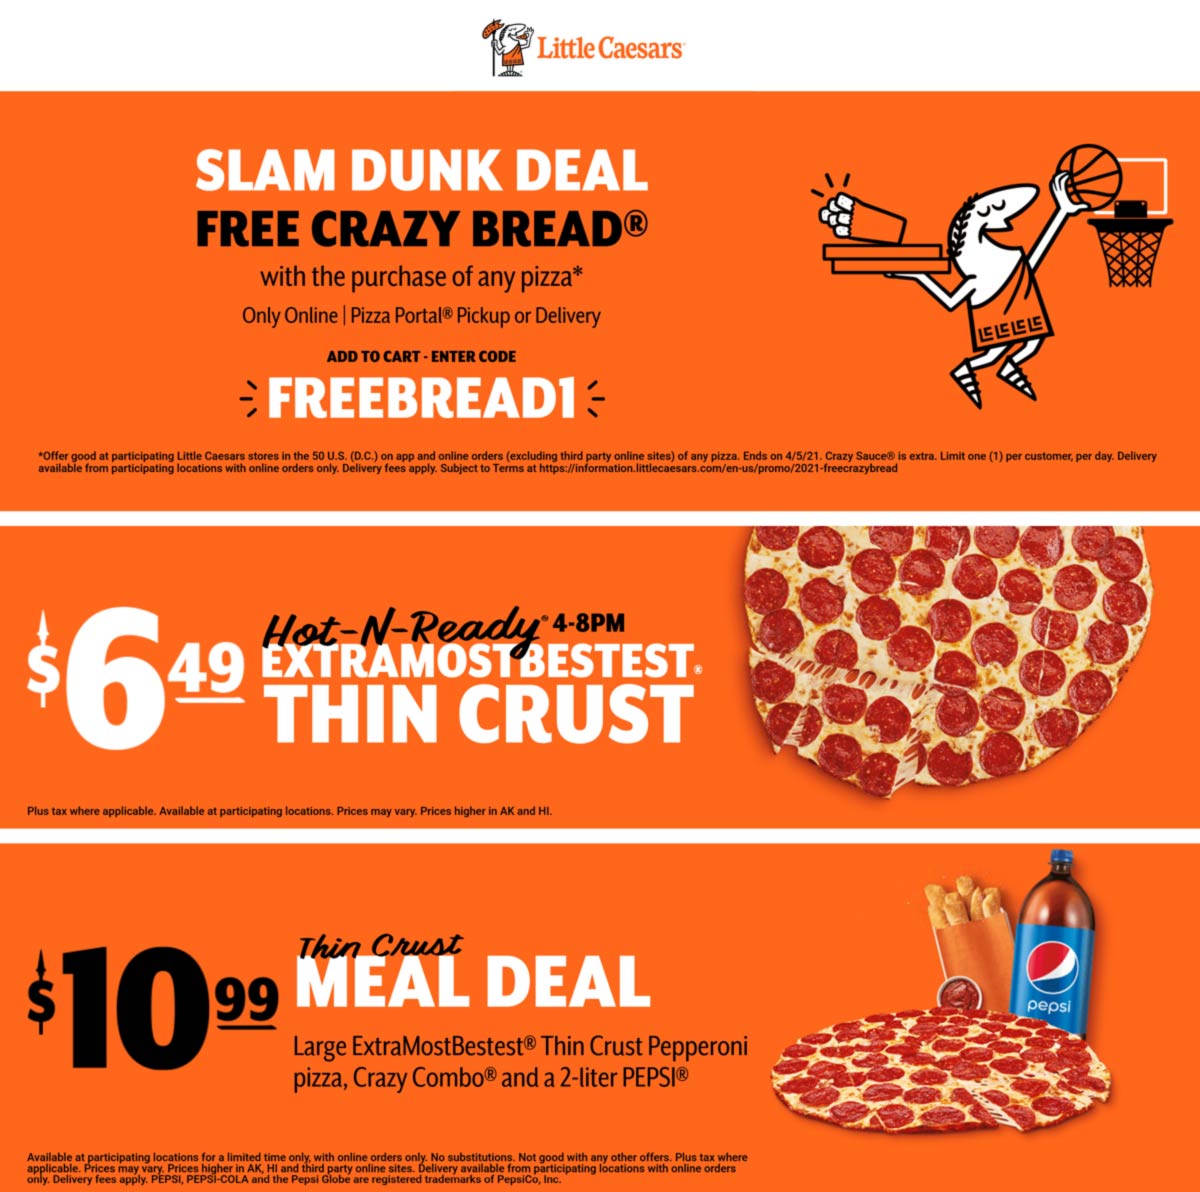 Little Caesars restaurants Coupon  Free crazy bread with any pizza at Little Caesars via promo code FreeBread1 #littlecaesars 